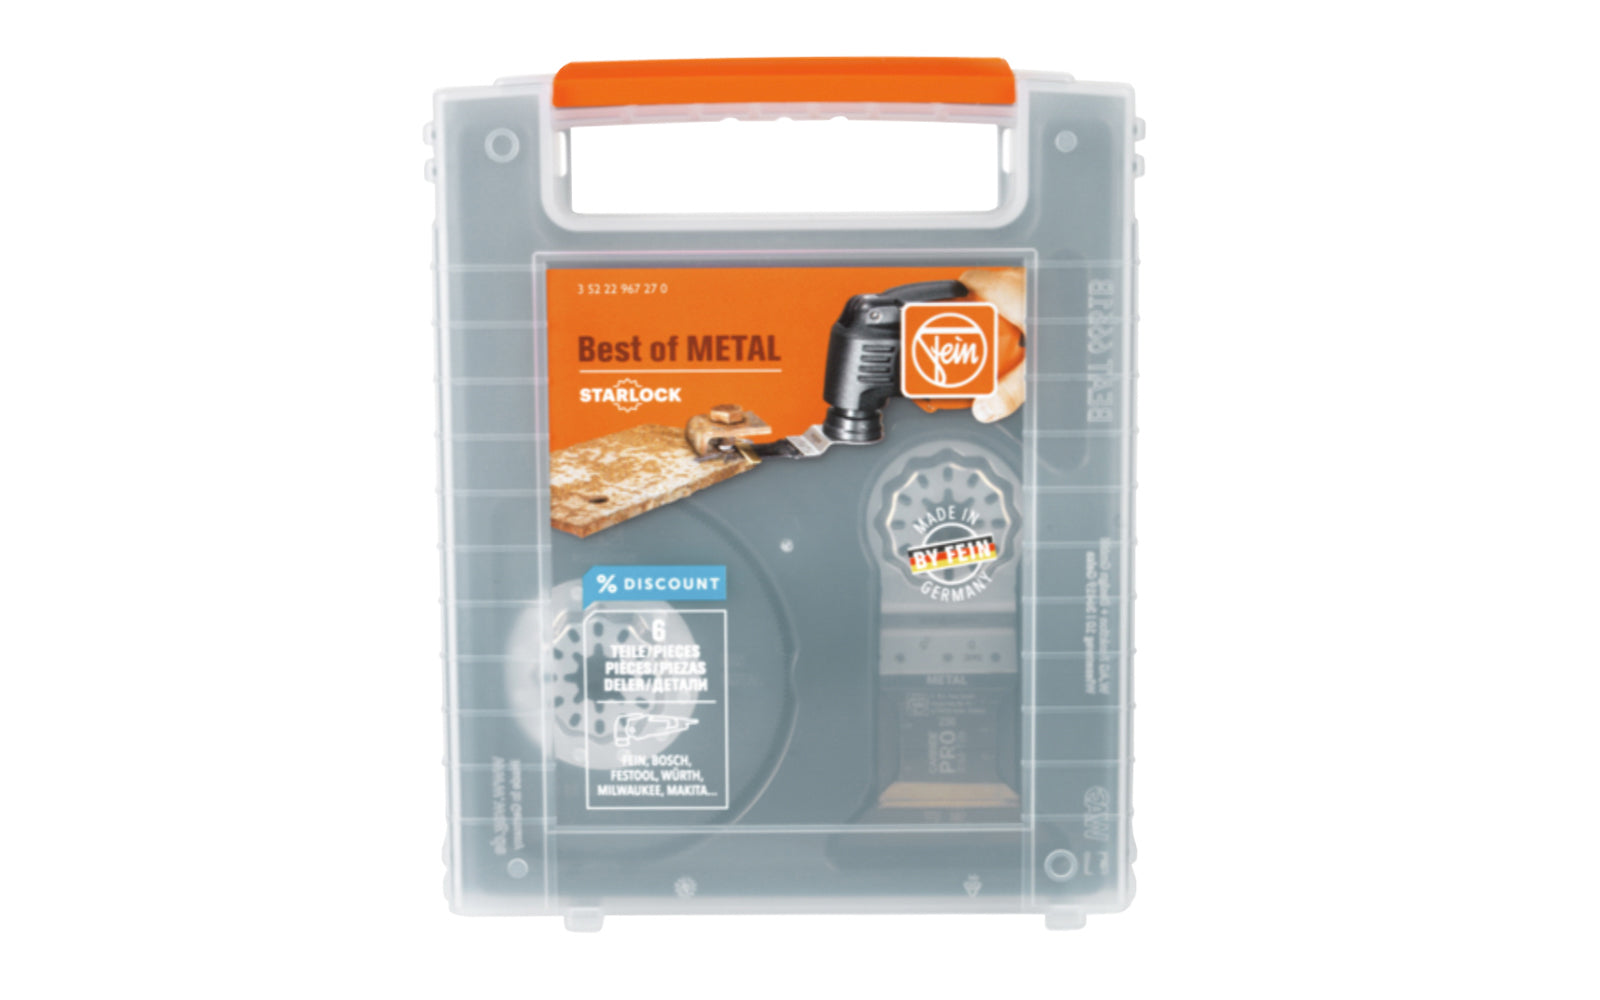 Fein Tools "Best of Metal" 6-piece saw blades designed for processing hardened & non-hardened metals. Includes plastic storage box. (1) E-Cut CarbidePRO saw blade, E-Cut Long Life saw blade each, E-Cut universal saw blade, E-Cut fine saw blade, HSS segment saw blade. Made in Germany. 35222967270. 4014586444215